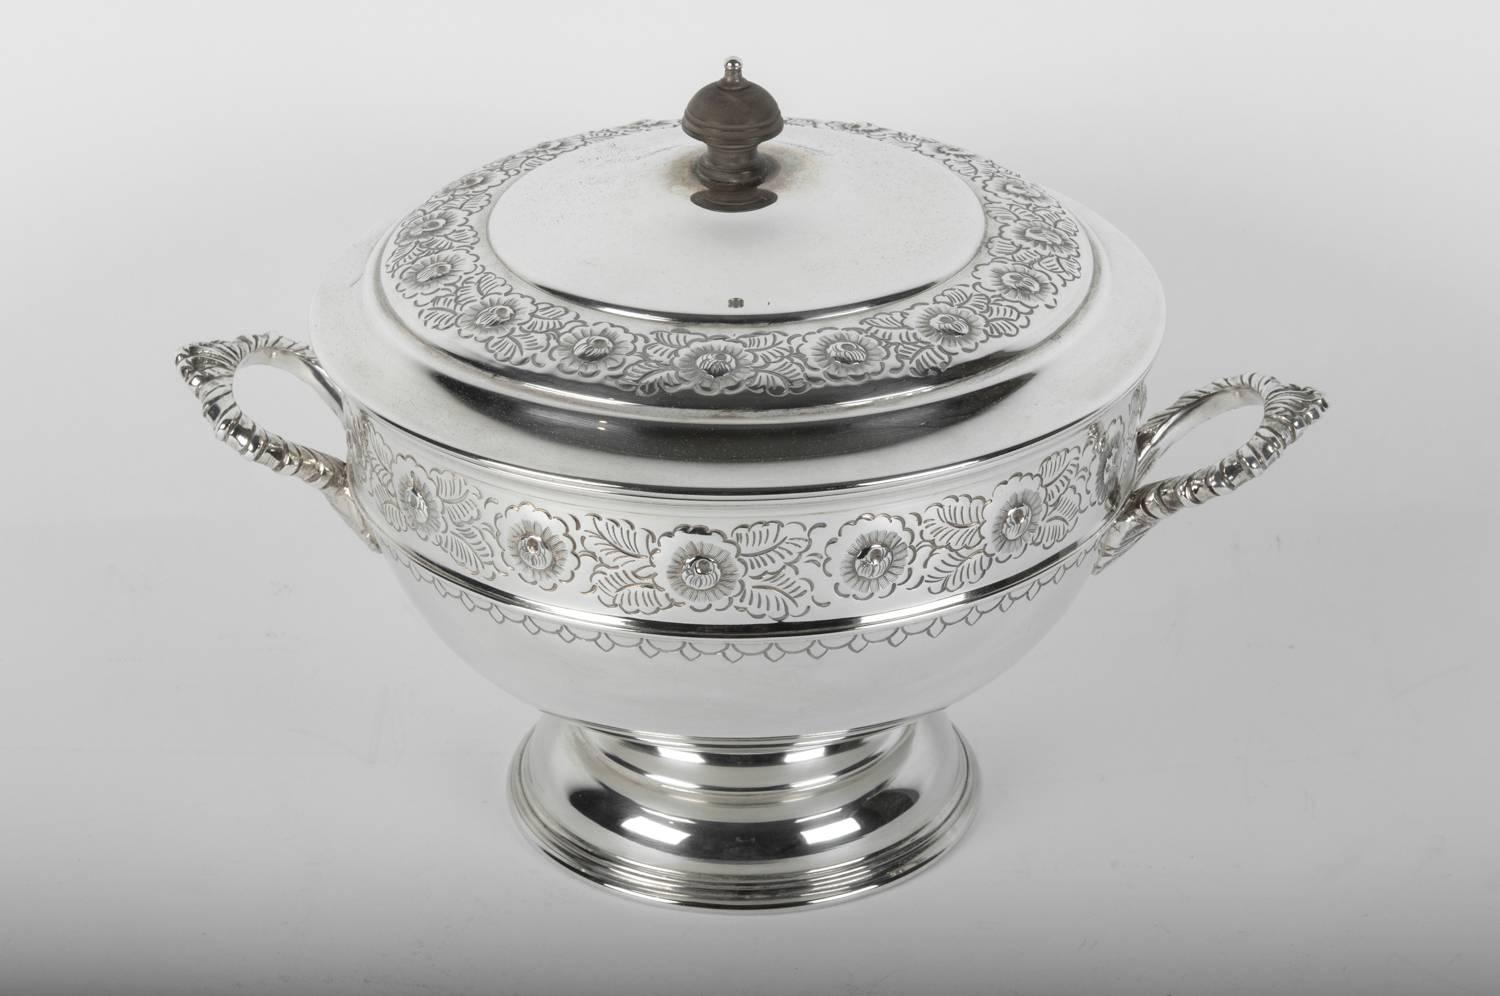 Old English Sheffield silver plated covered tureen with handles. Excellent antique condition. The covered tureen measure 9.5 inches high X 14.5 inches body diameter X 6 inches bottom diameter.